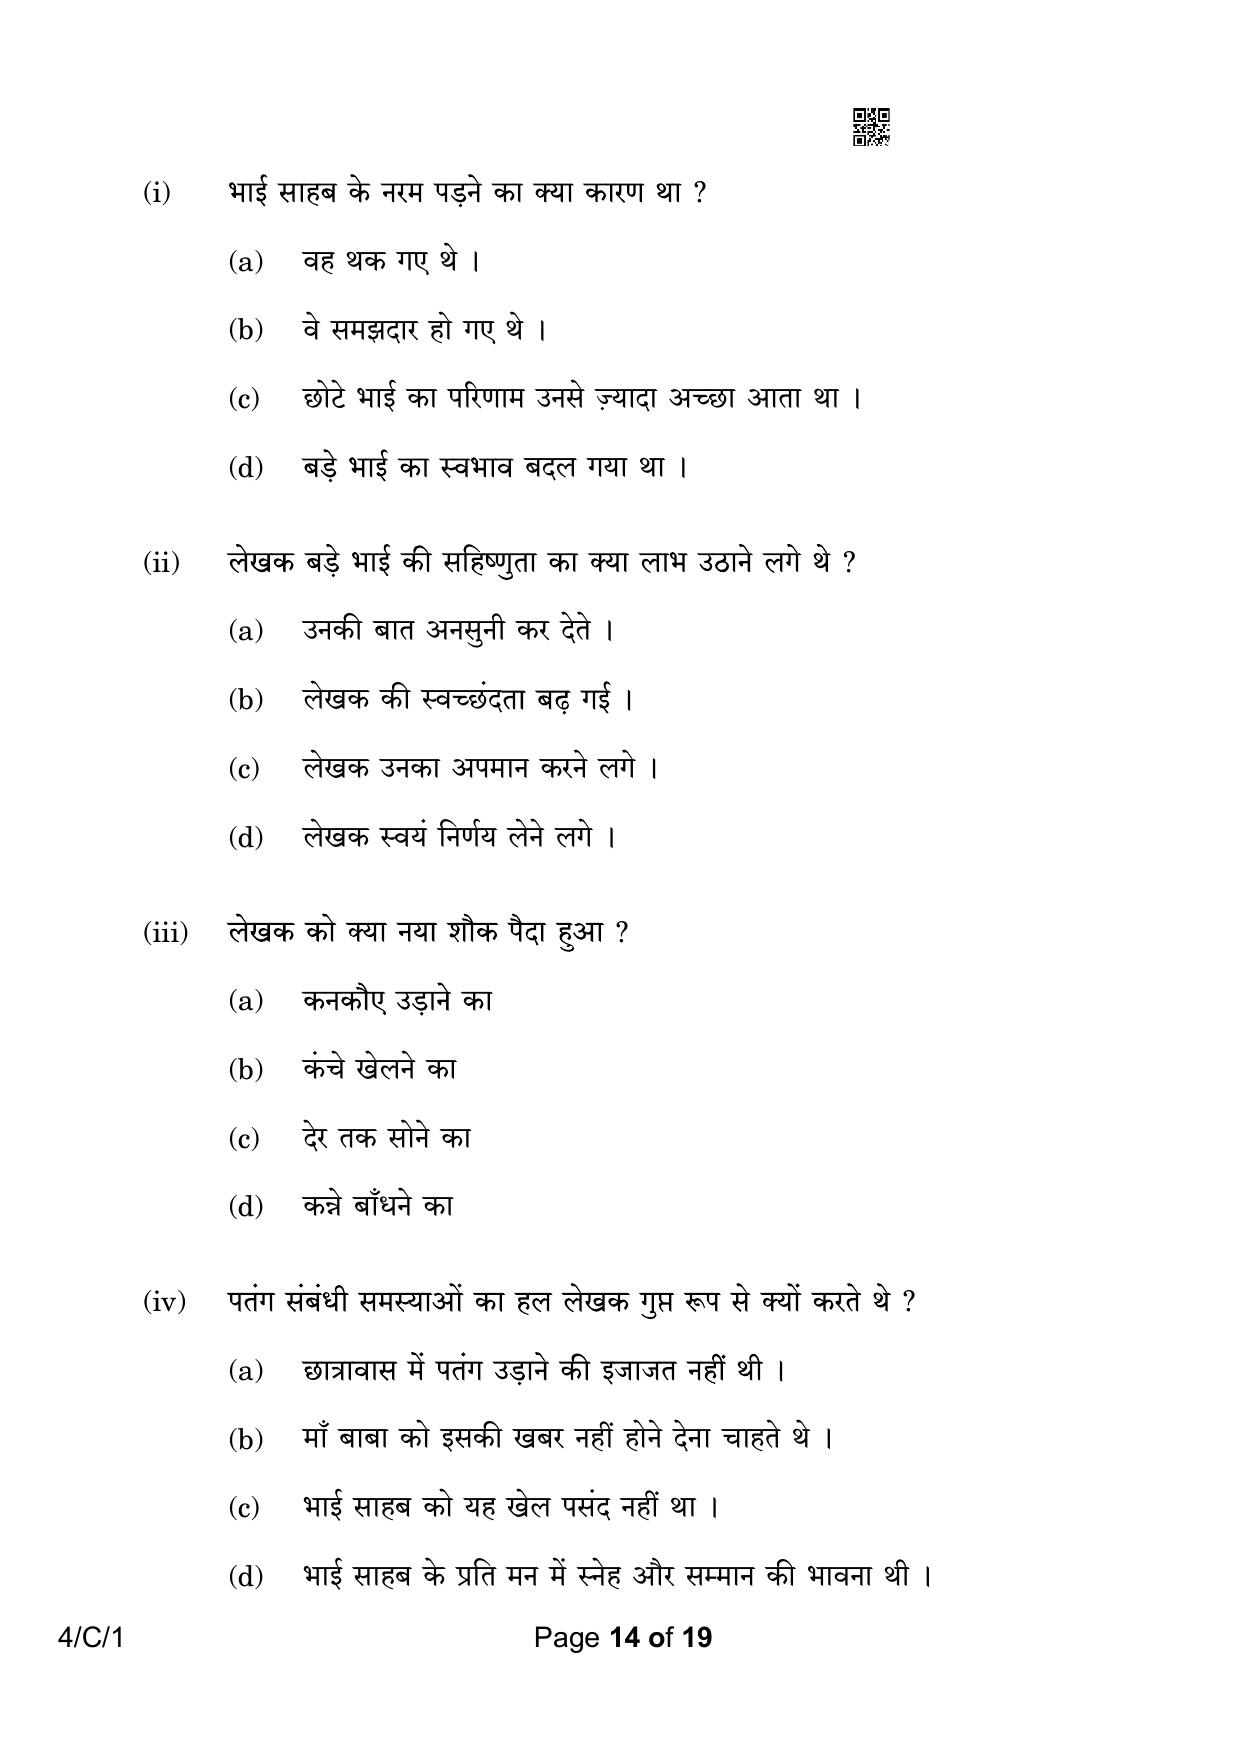 CBSE Class 10 4-1 Hindi B 2023 (Compartment) Question Paper - Page 14